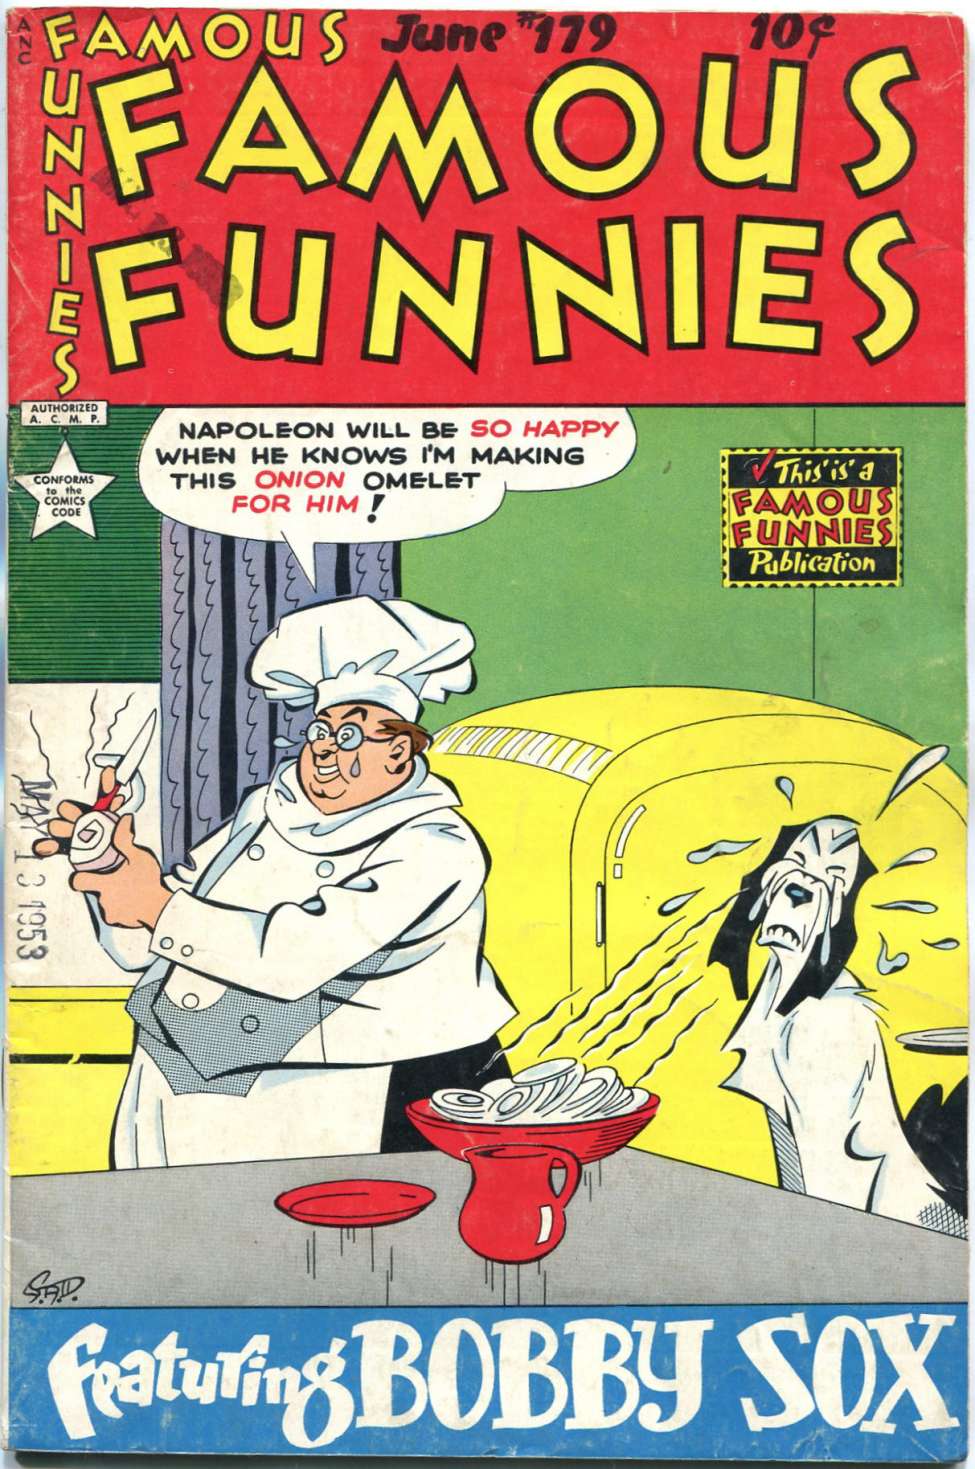 Book Cover For Famous Funnies 179